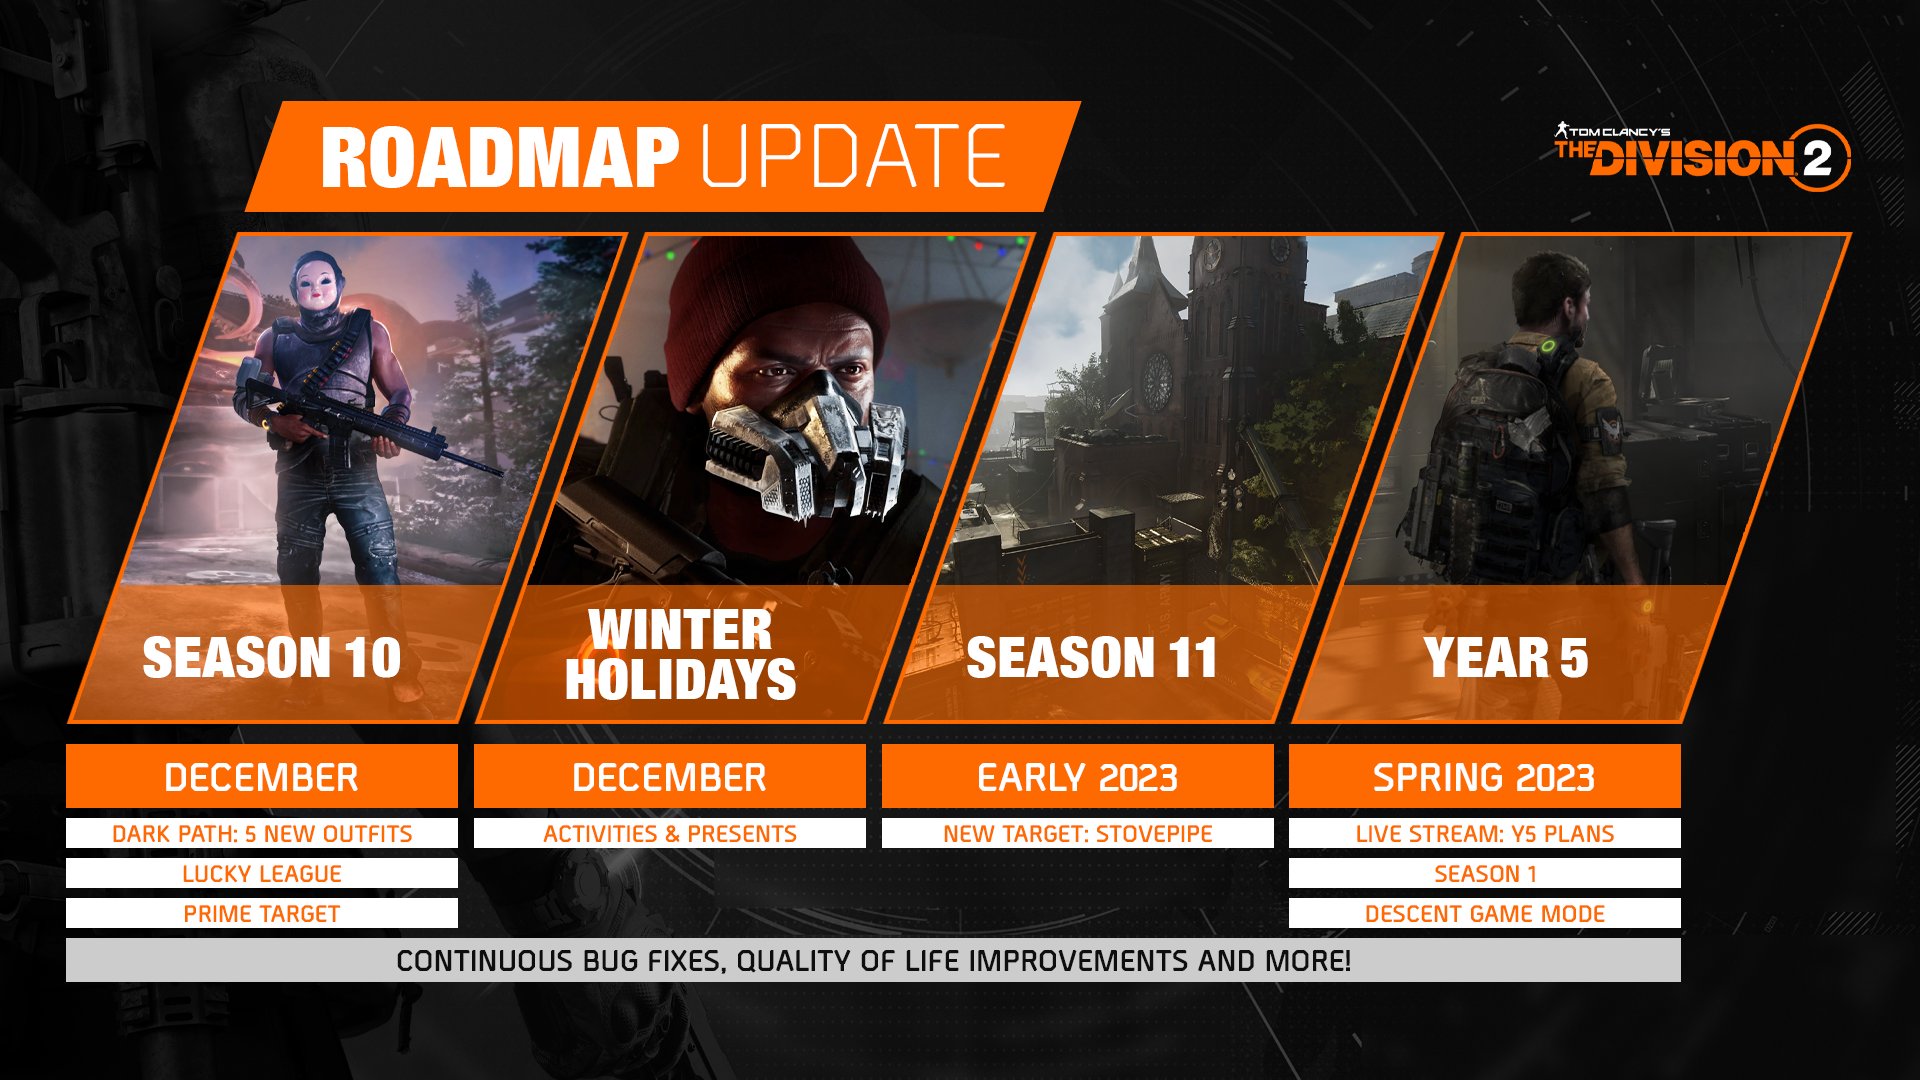 Tom Clancy's The Division on Twitter: "#TheDivision2 Roadmap has updated! Coming in December &amp; first of 2023: 🔸Dark Path Apparel Event 🔸Lucky League &amp; General Anderson Manhunt 🔸Winter Cheer 🔸Season